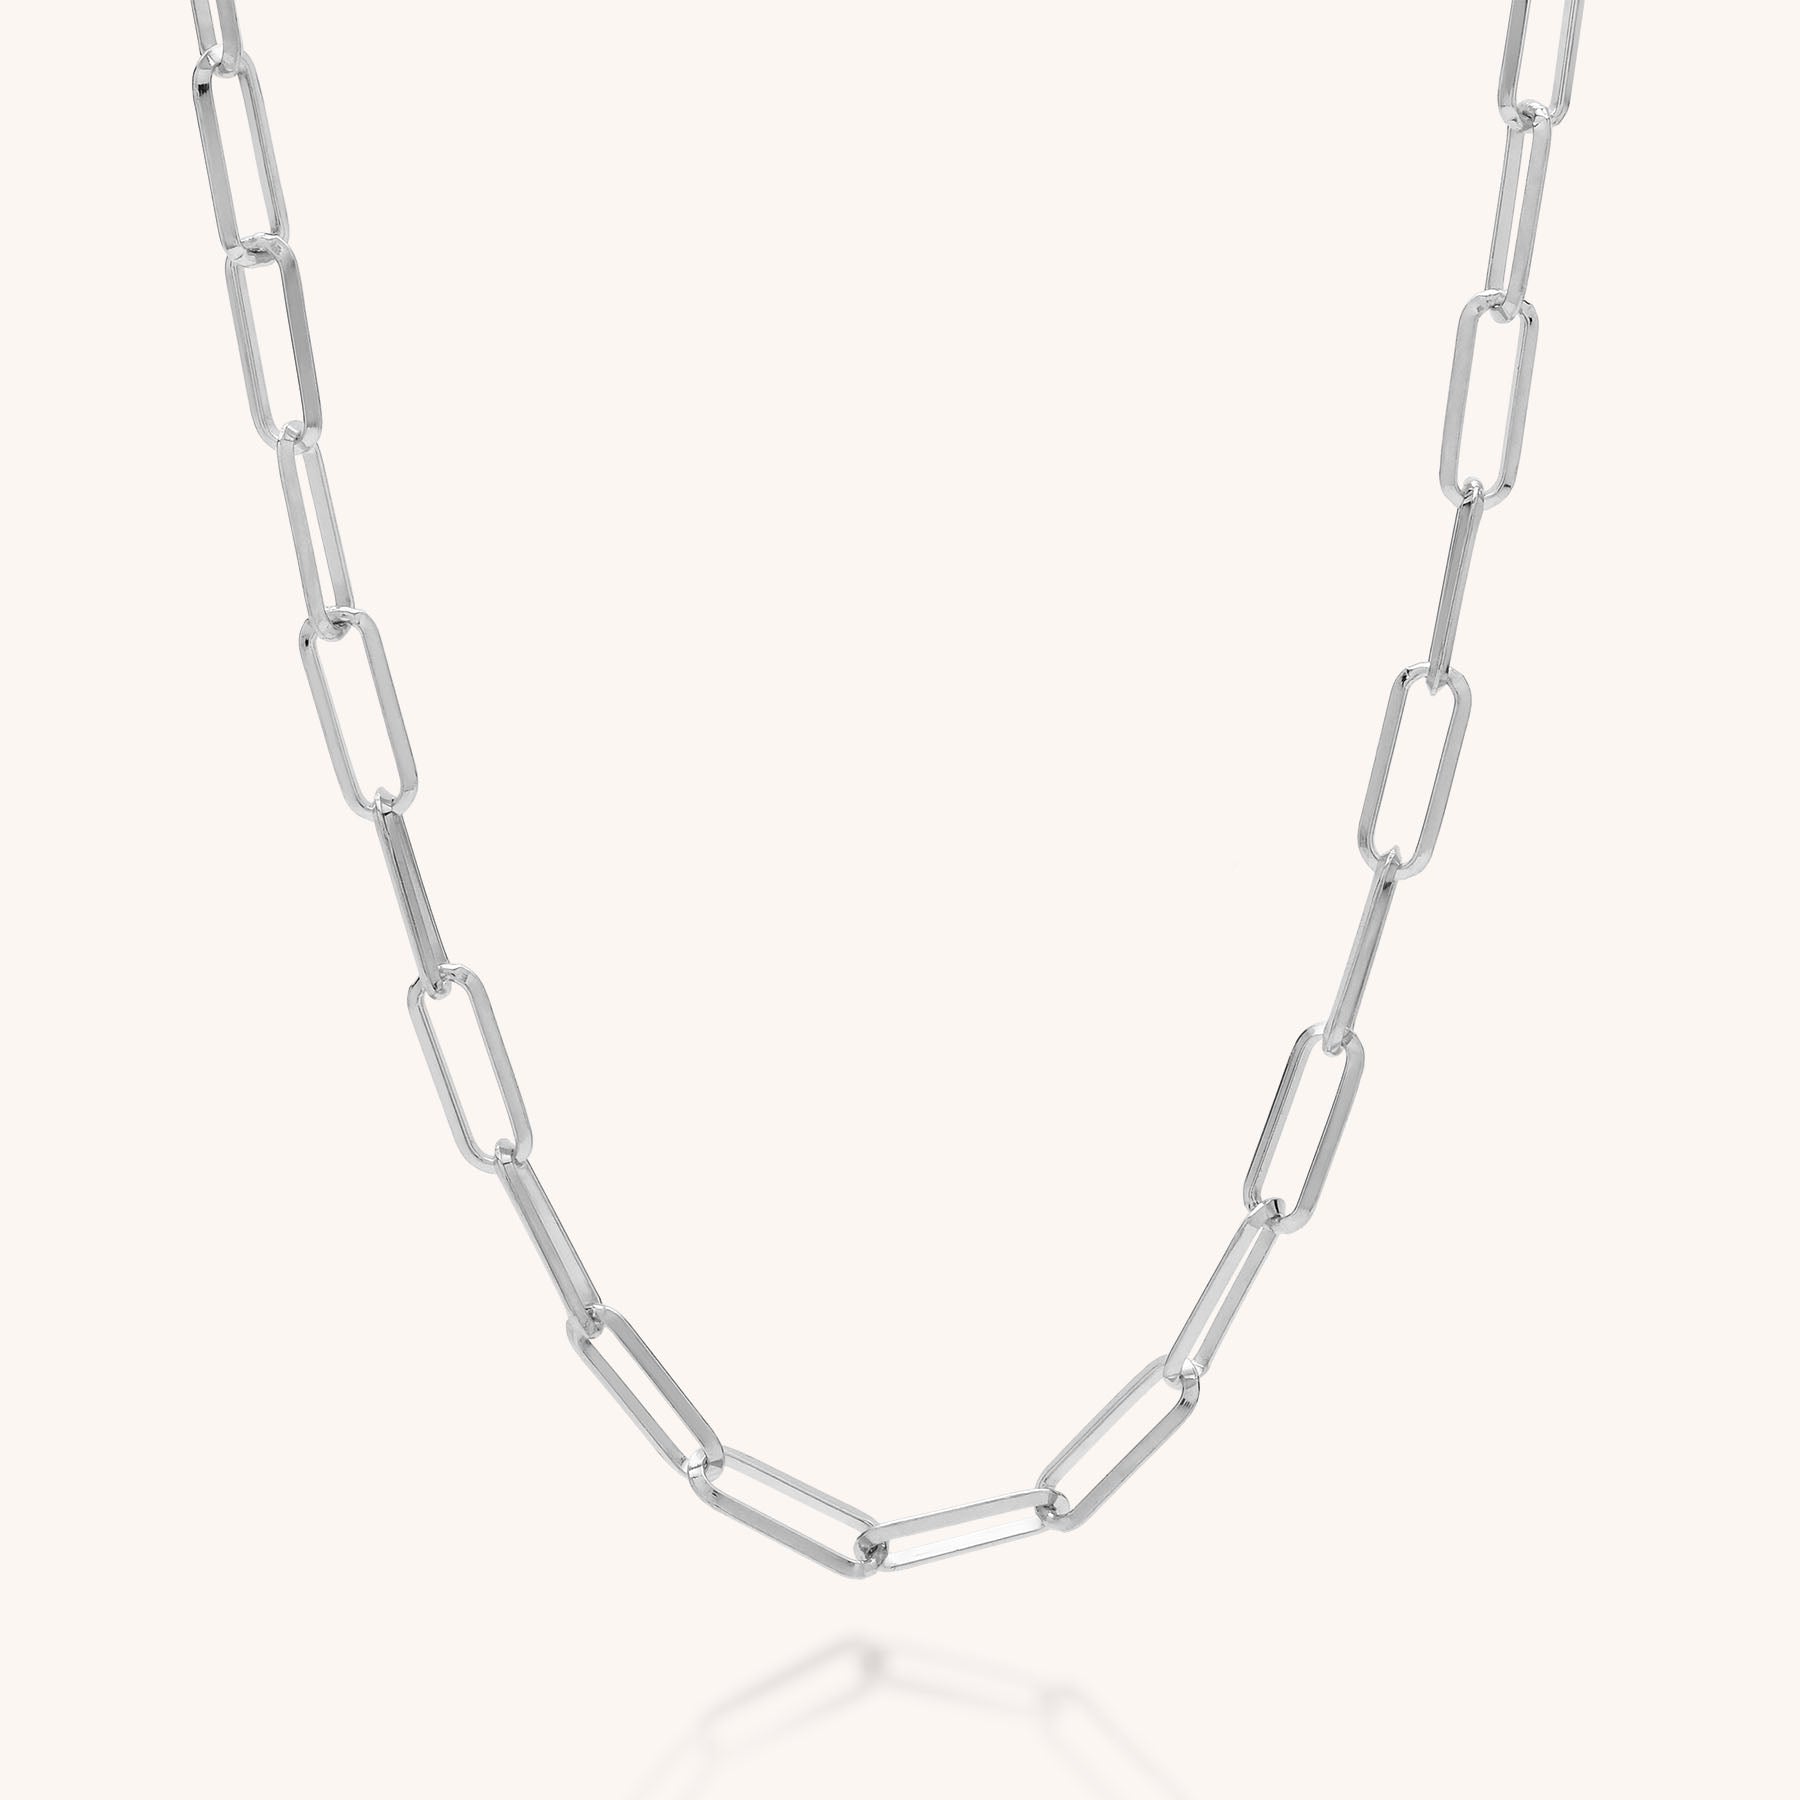 Triangular Paperclip Necklace